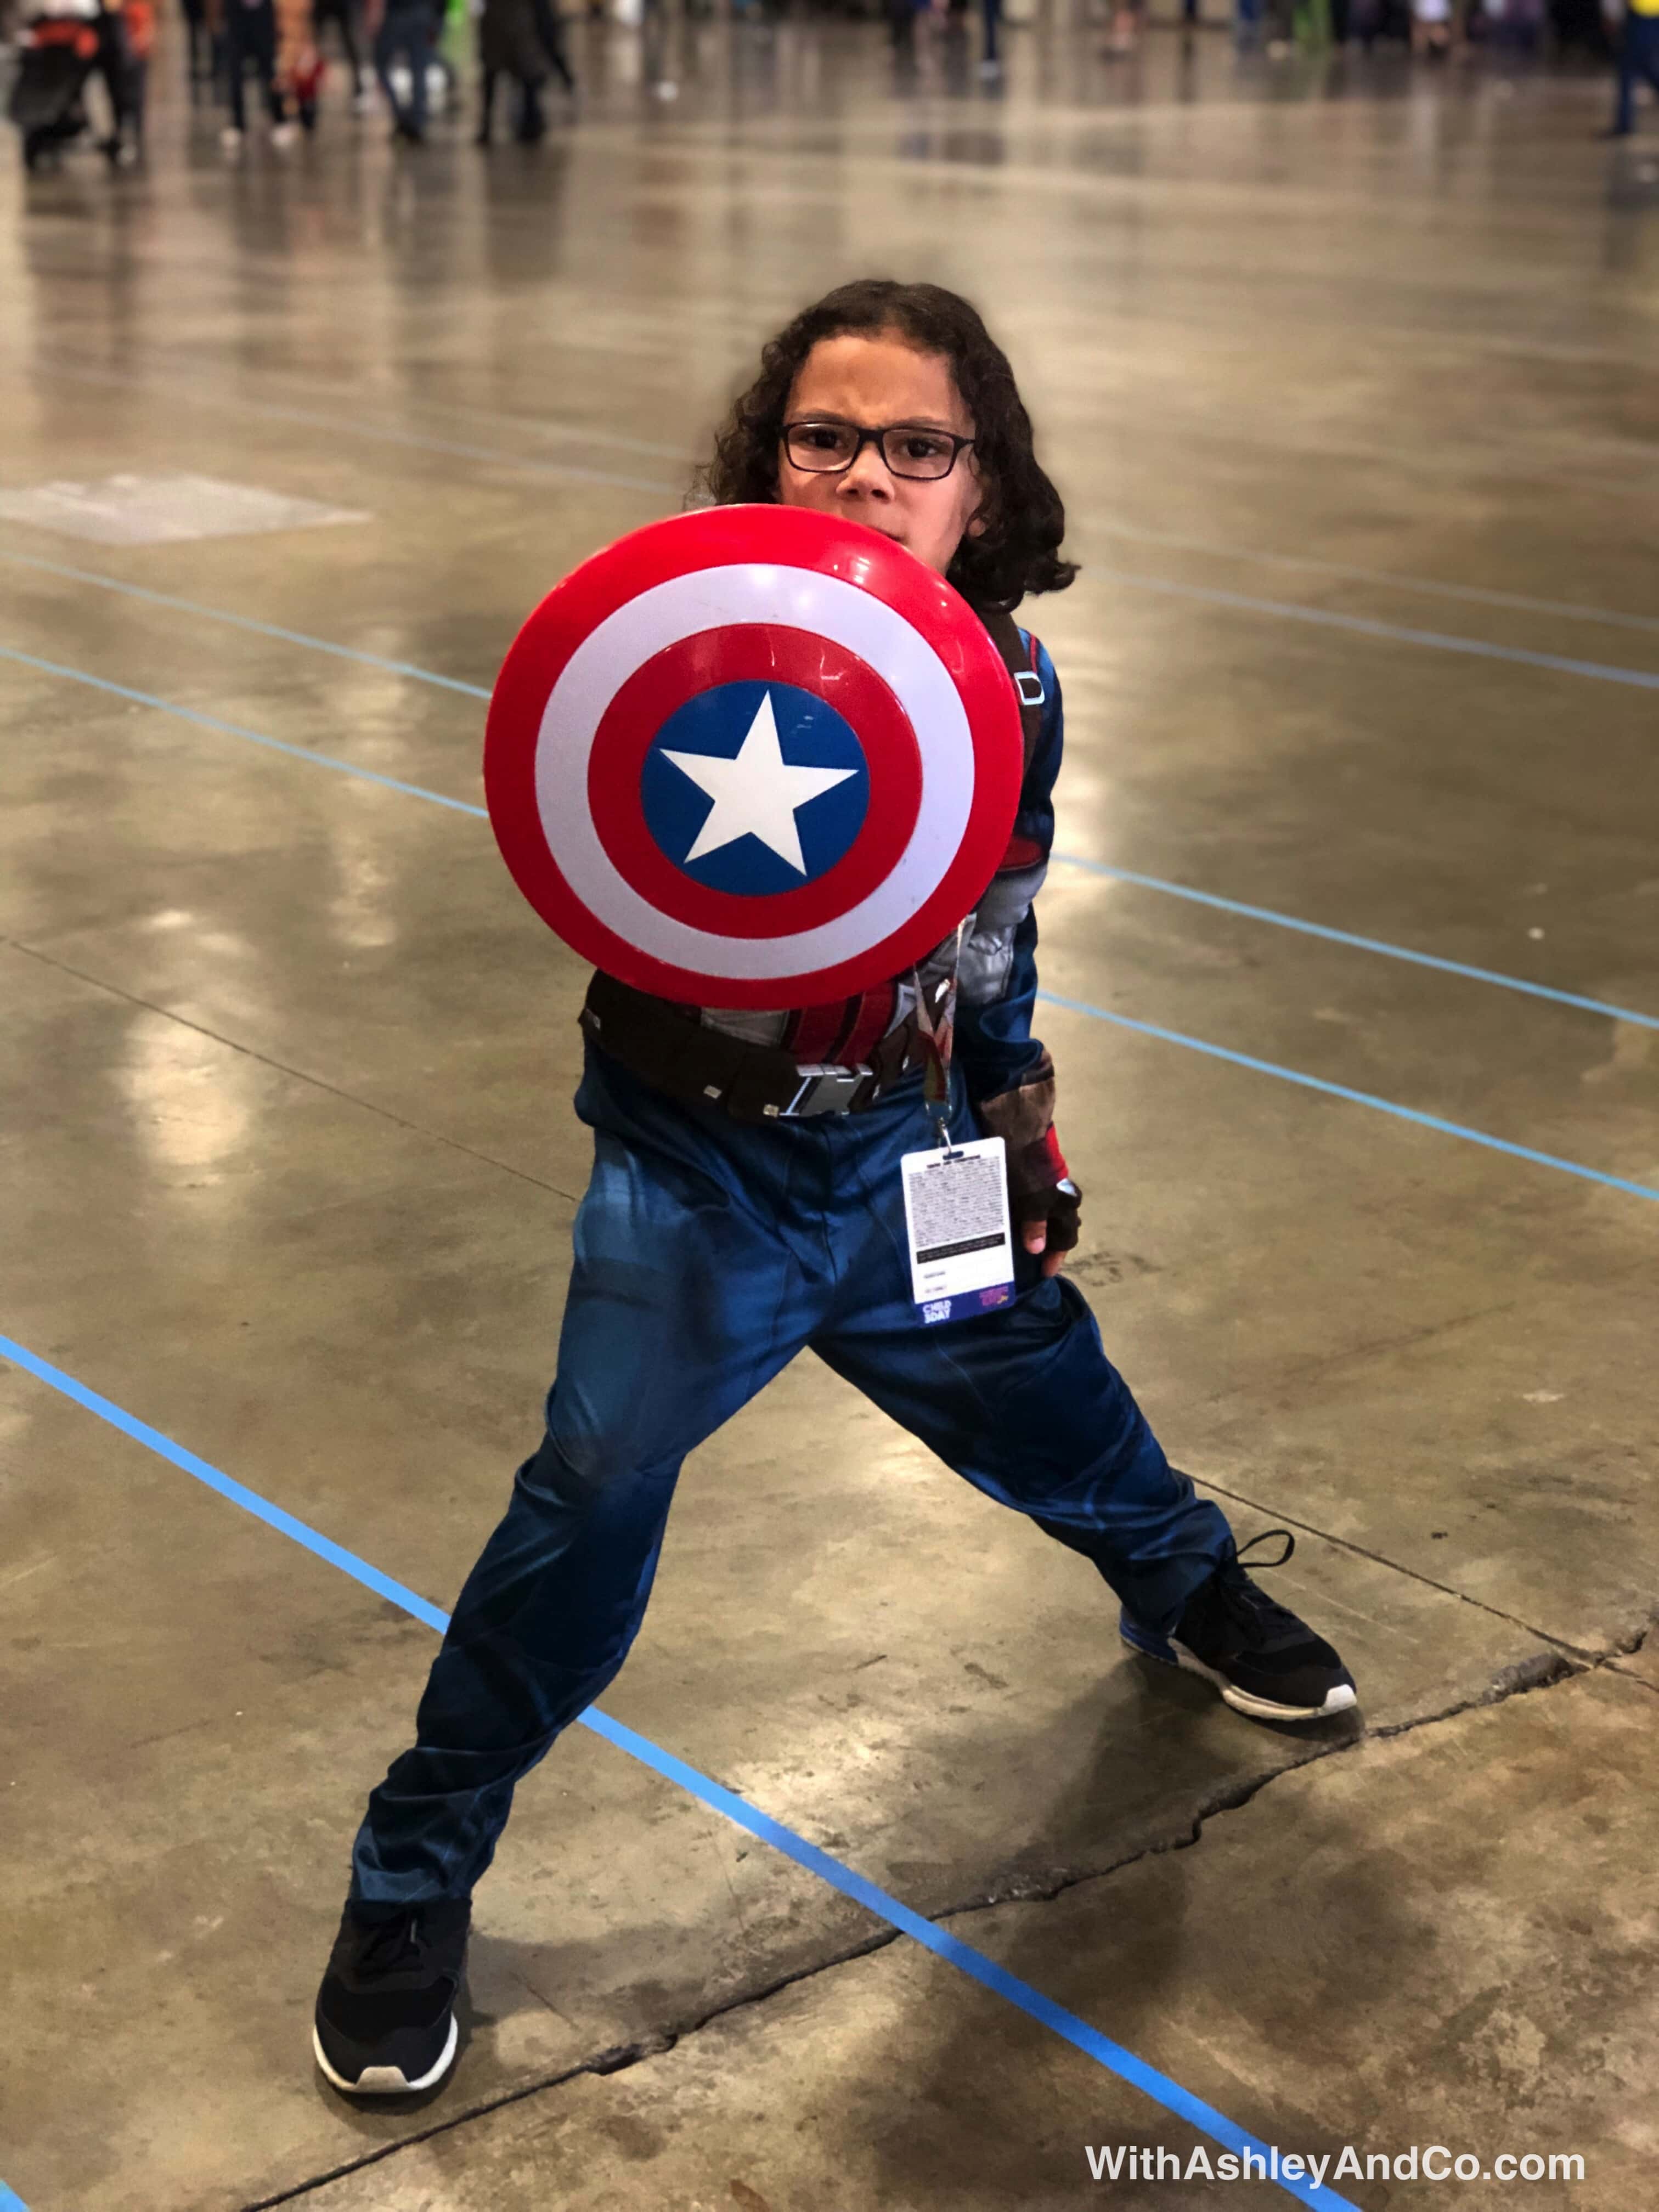 Awesome Con 2019 Highlights